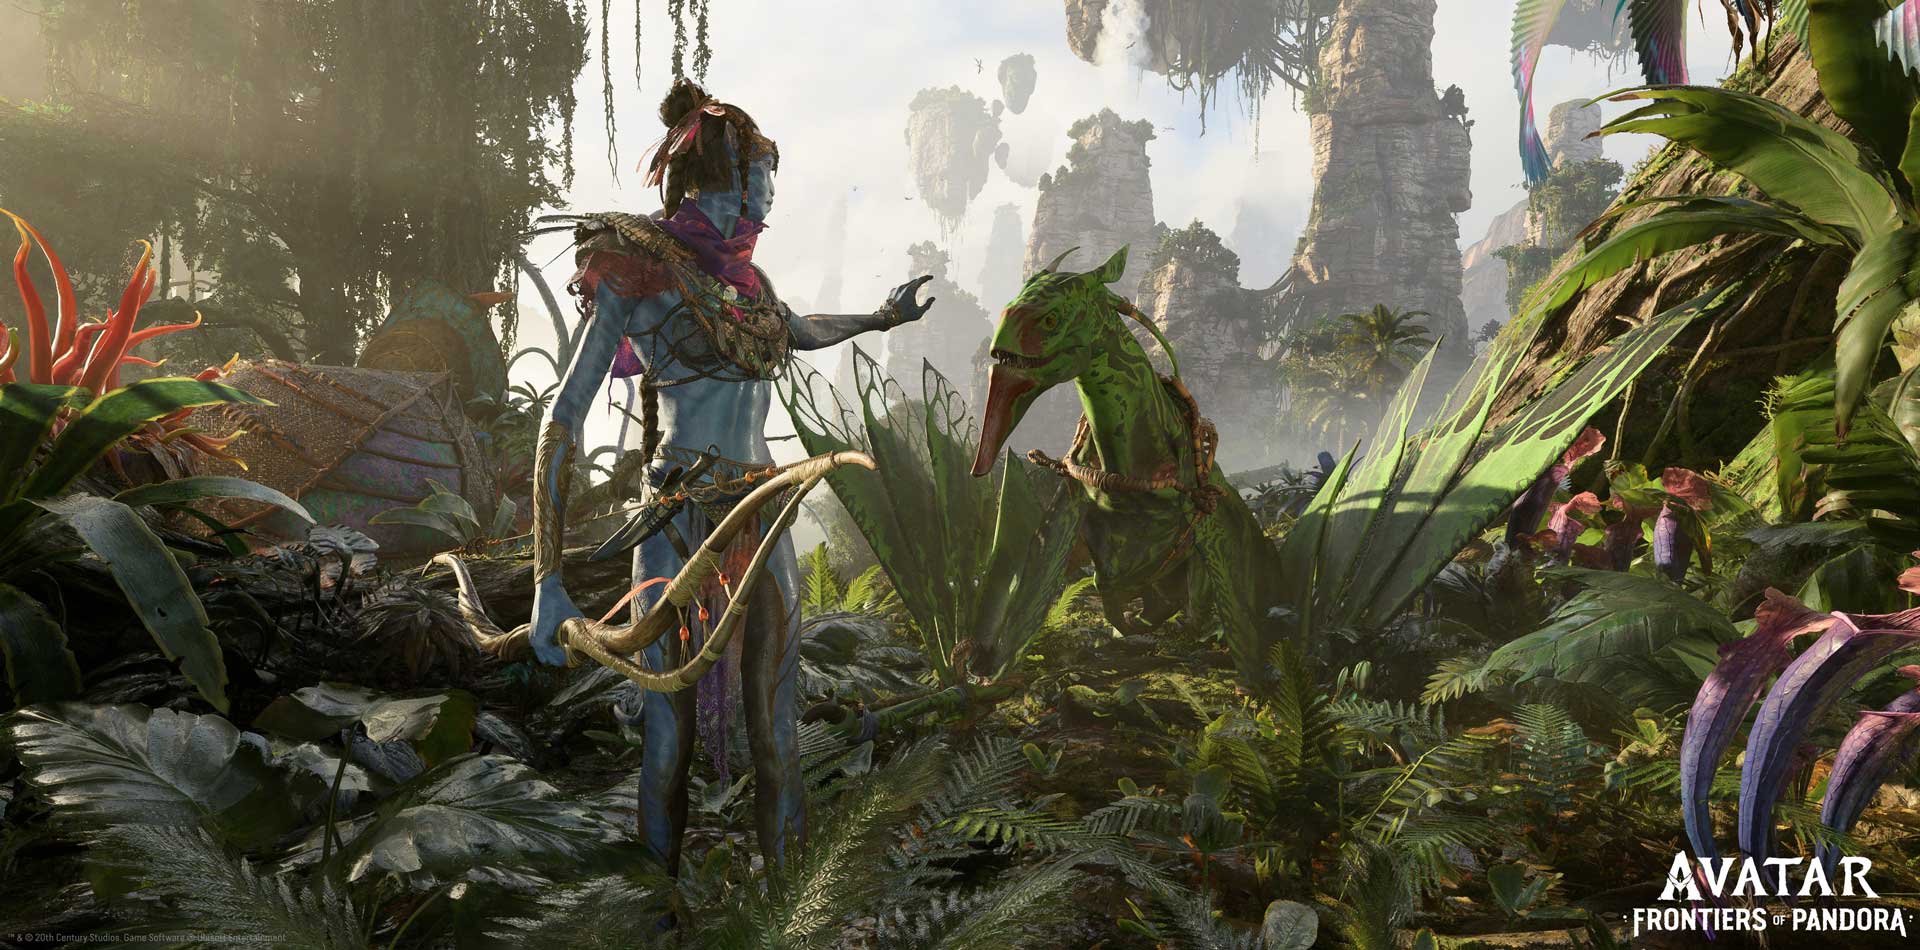 Avatar: Frontiers of Pandora Delayed to 2023 or 2024